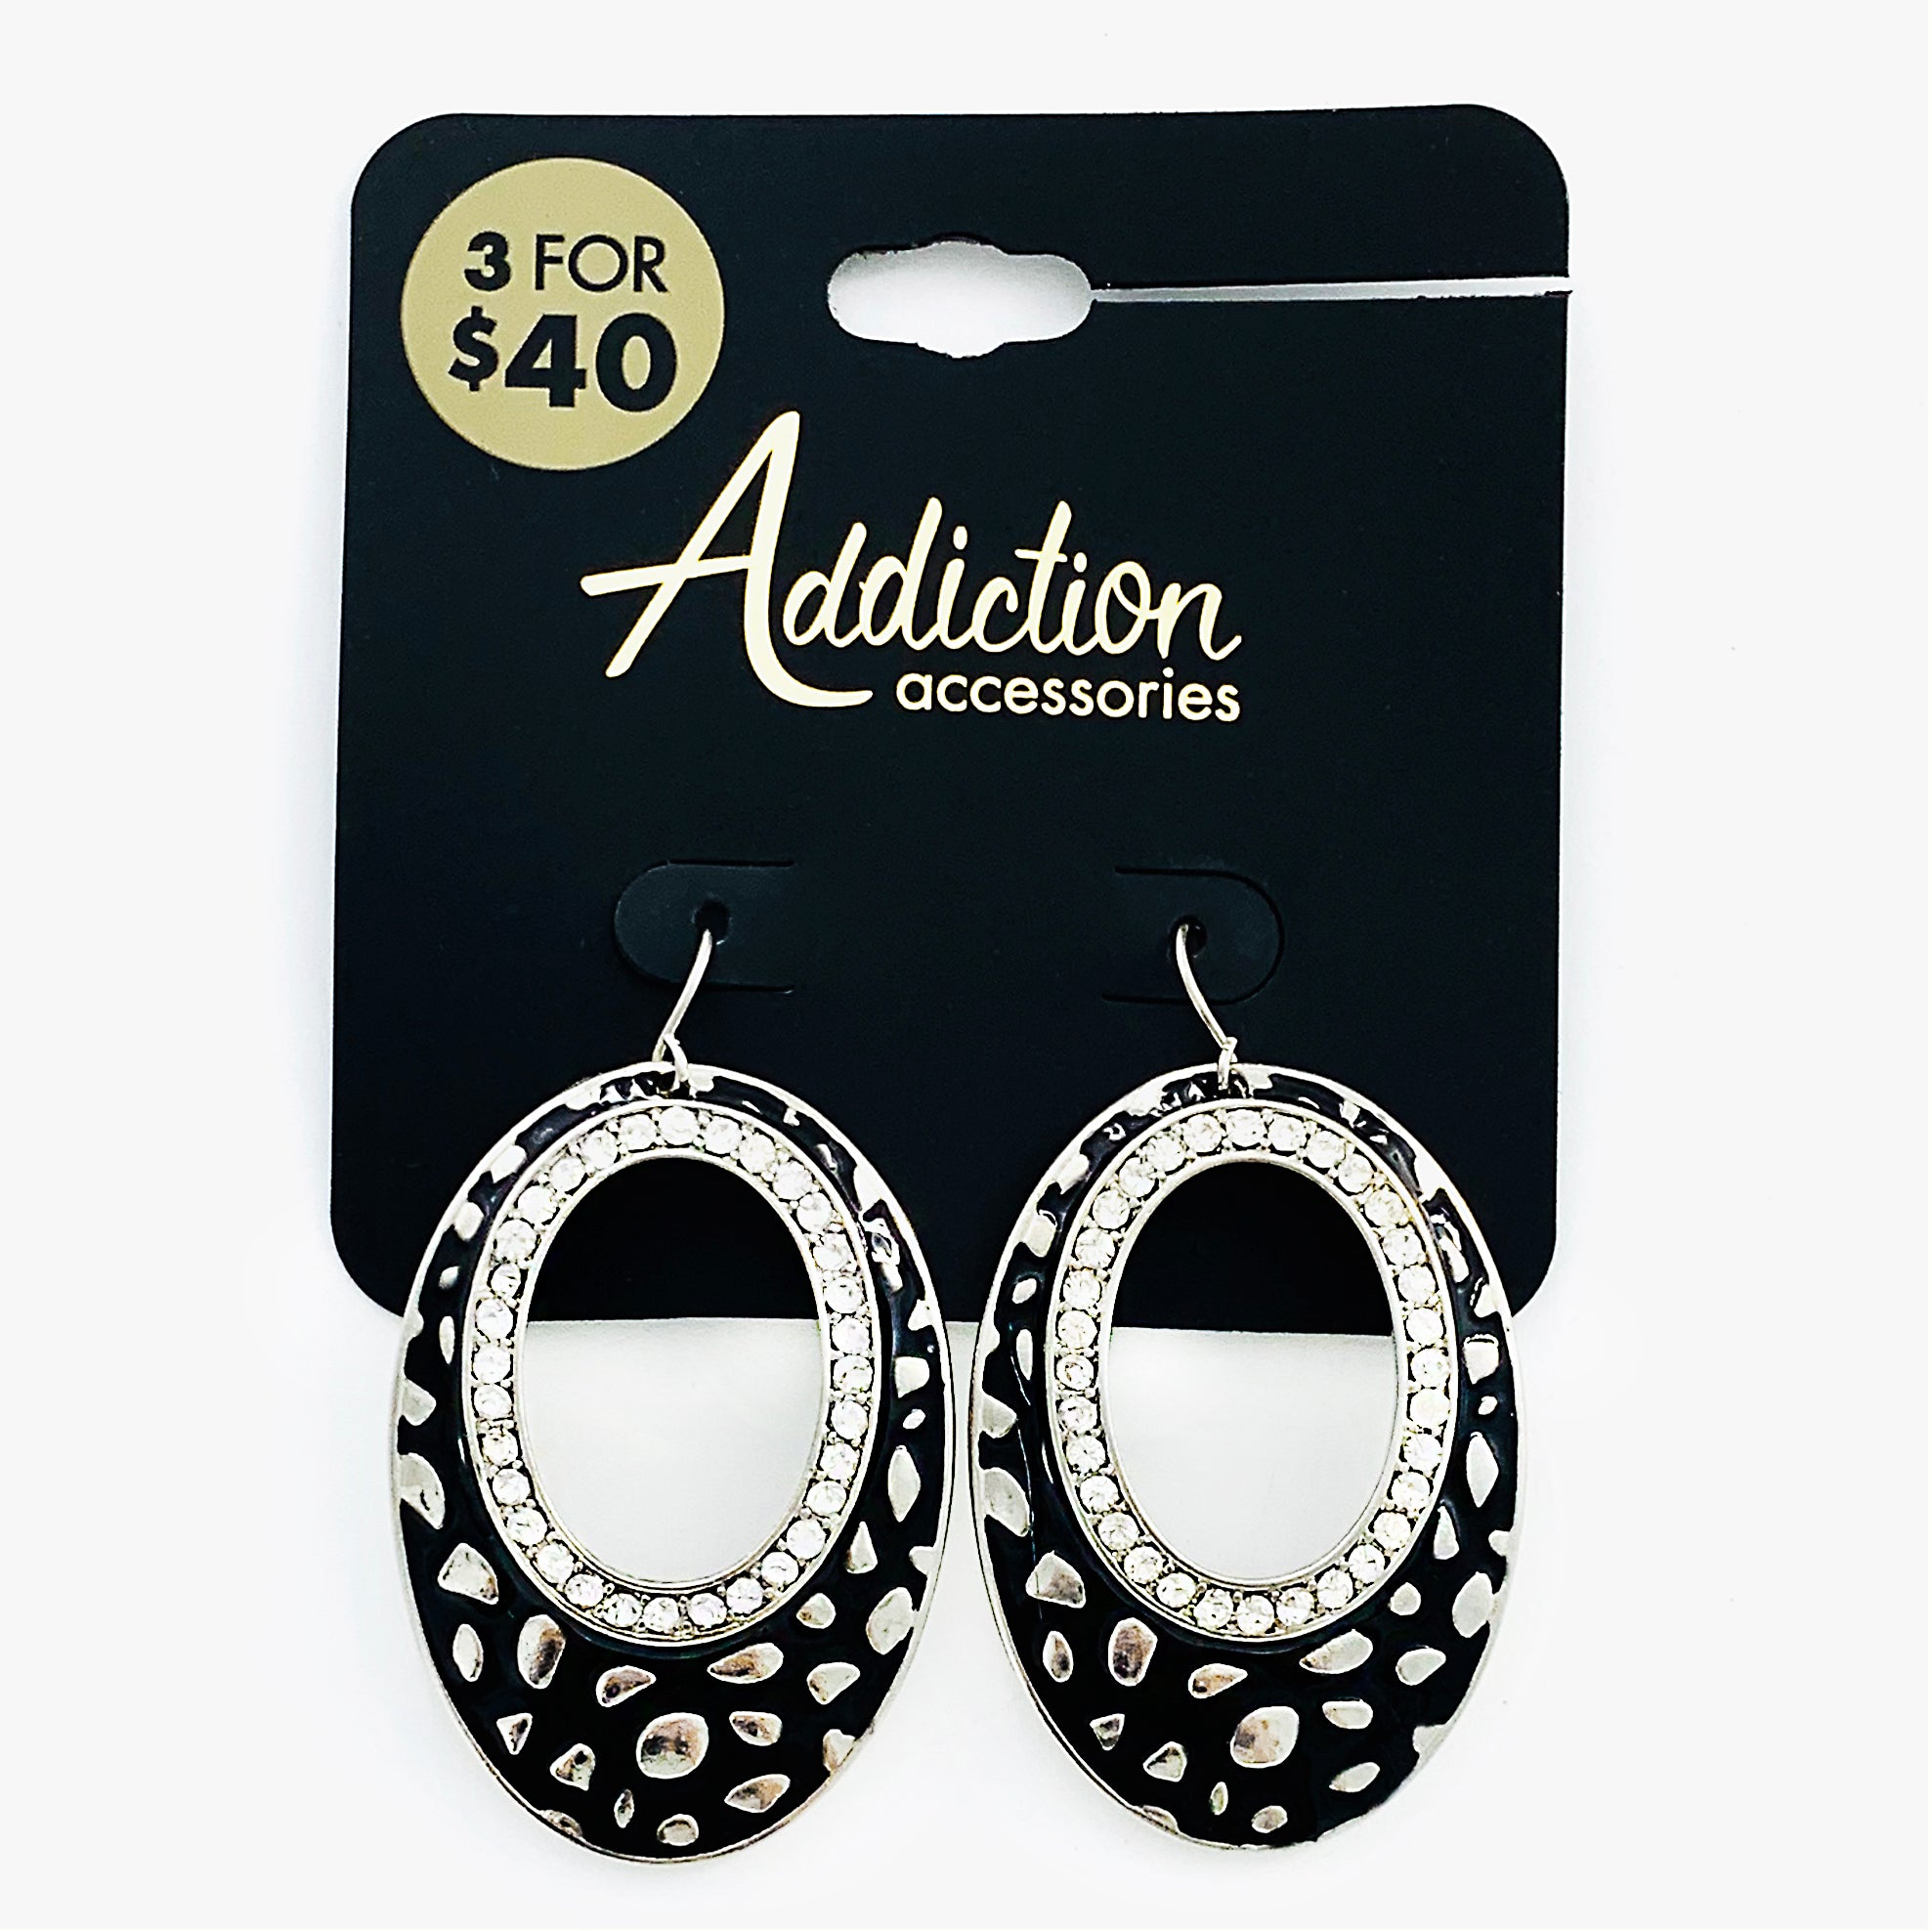 Black and silver oval earrings with diamante stones